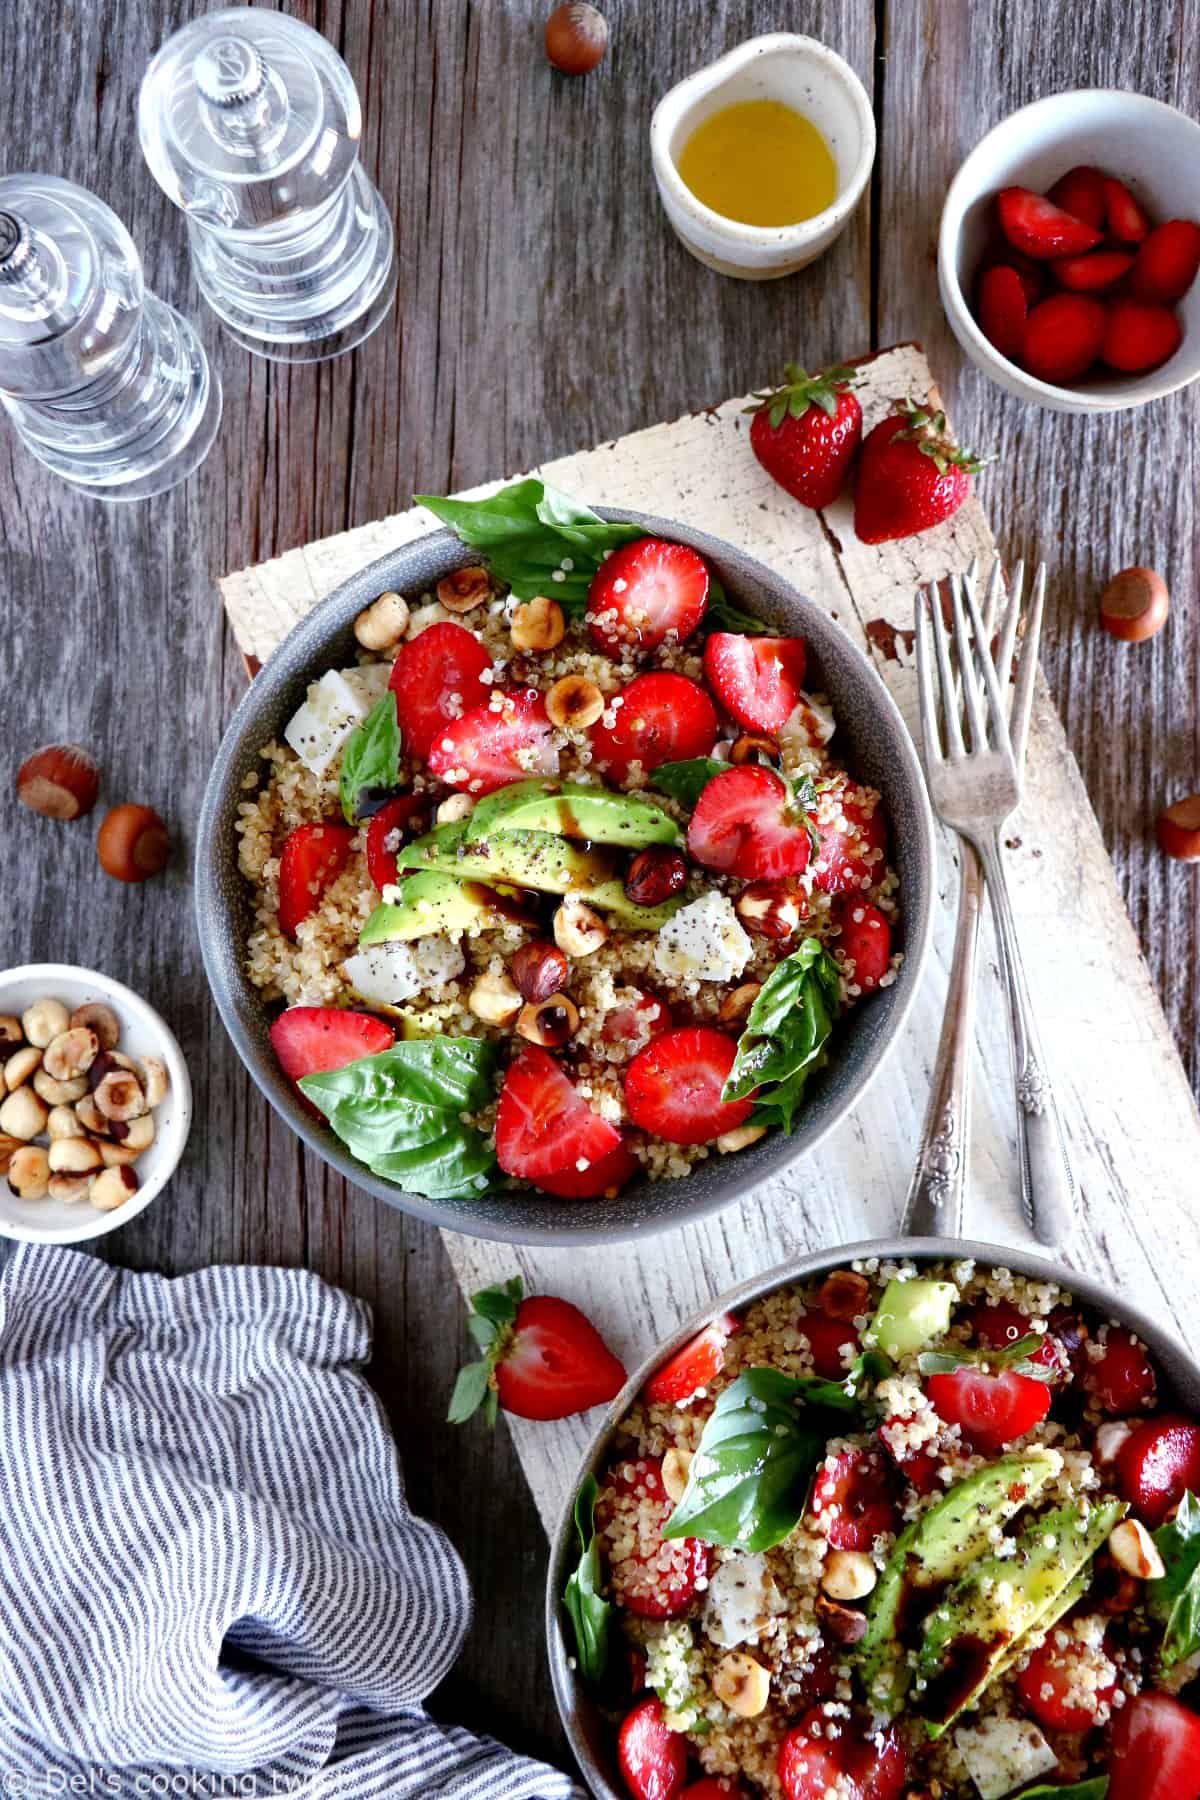 This balsamic strawberry quinoa salad with feta cheese makes an easy summer salad recipe, packed with refreshing flavors.